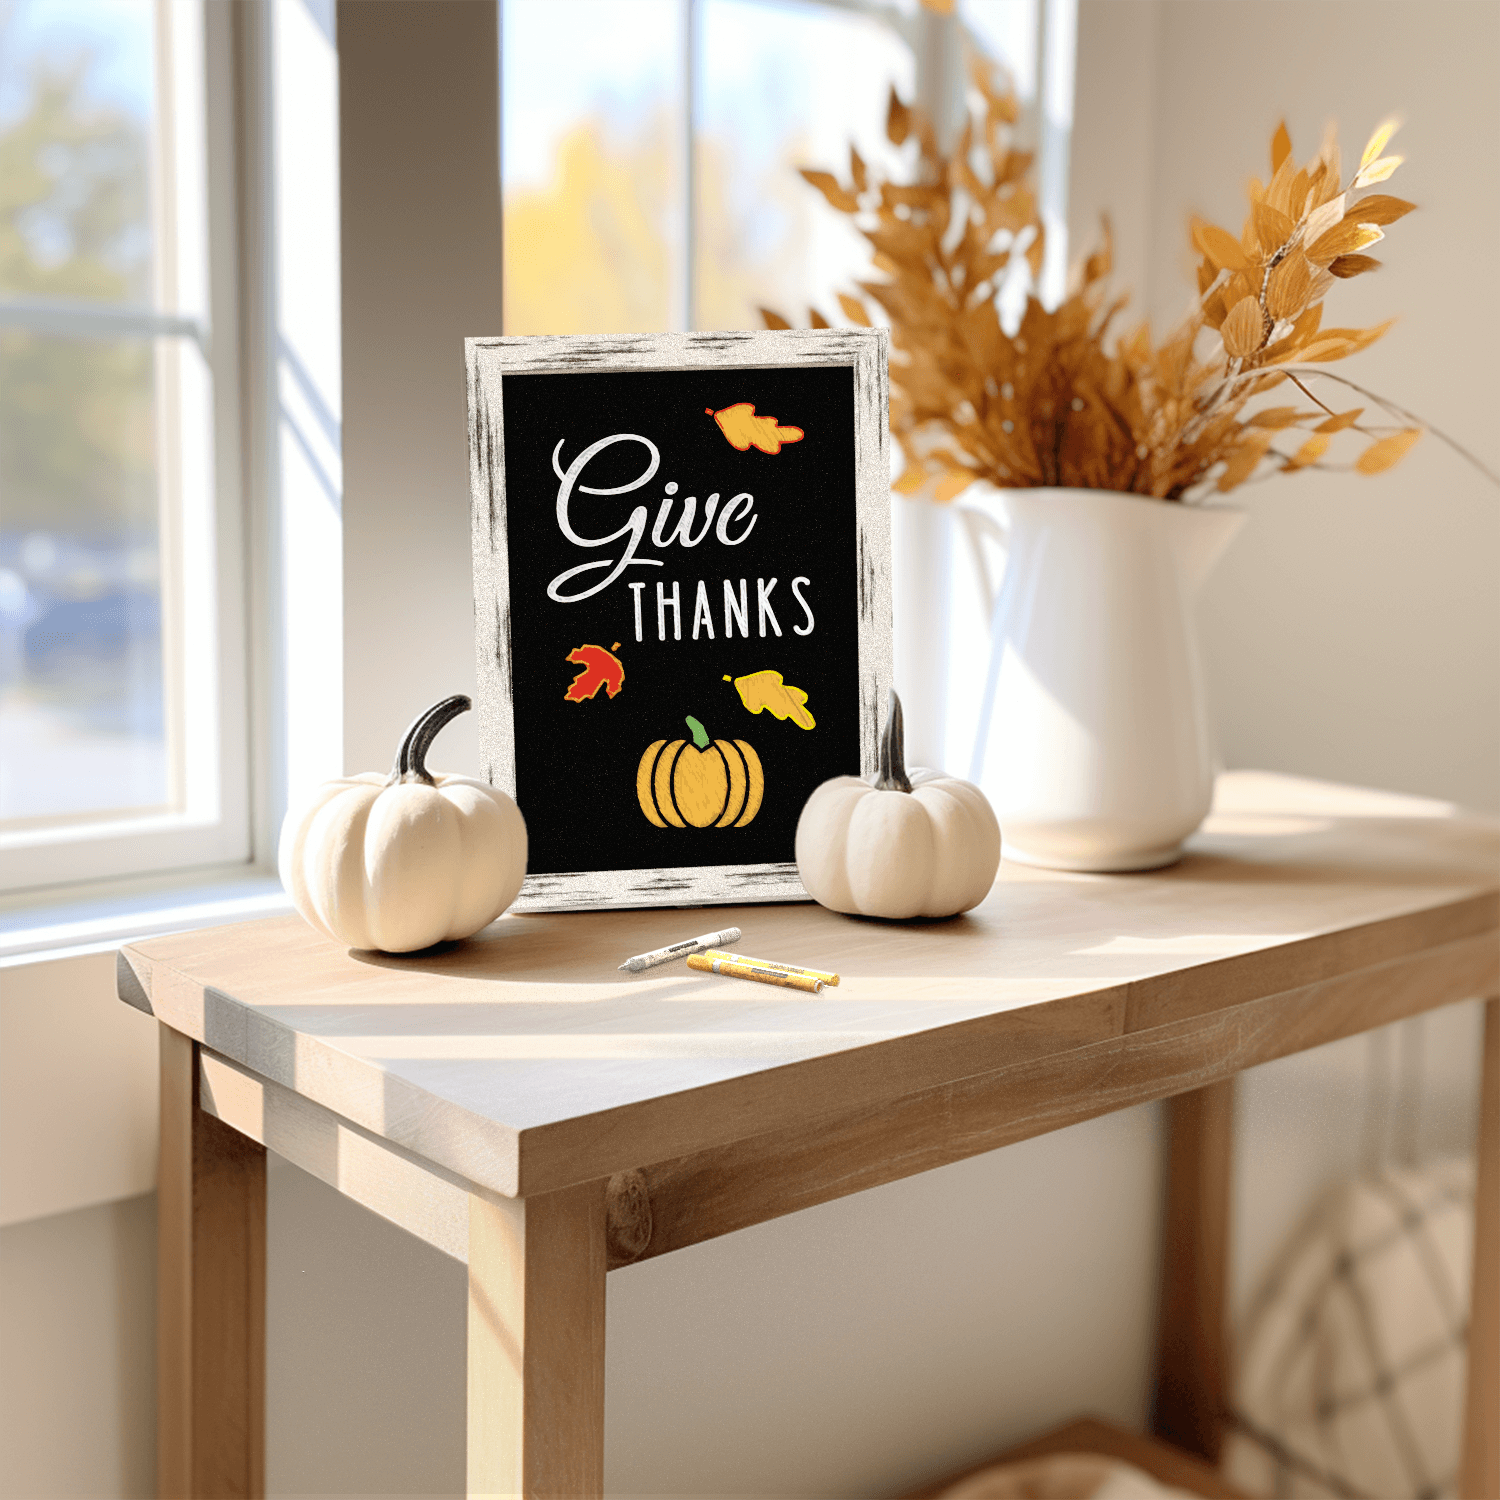 'Give' Calligraphy chalkboard stencil for easy DIY chalkboard Thanksgiving signs